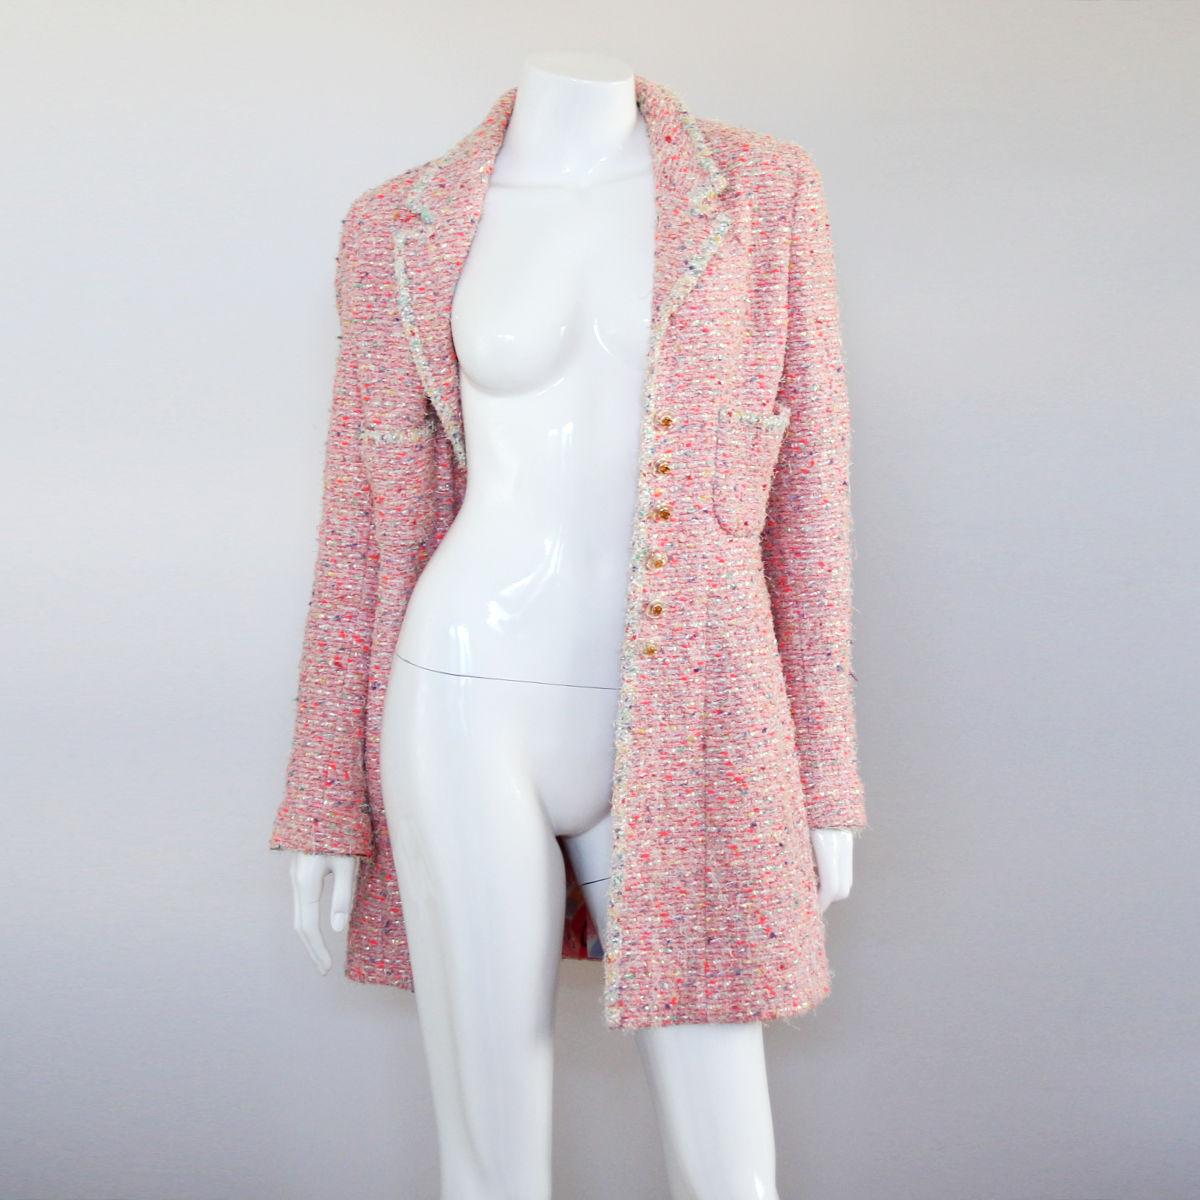 CHANEL

1997. Spring. Luxurious pink multicolored coat / blazer from Chanel by Karl Lagerfeld - in a classic tweed look.

Featuring clear acrylic buttons that have gold CC logo, and inner lining with floral multicolored camellia flower print.
Tweed